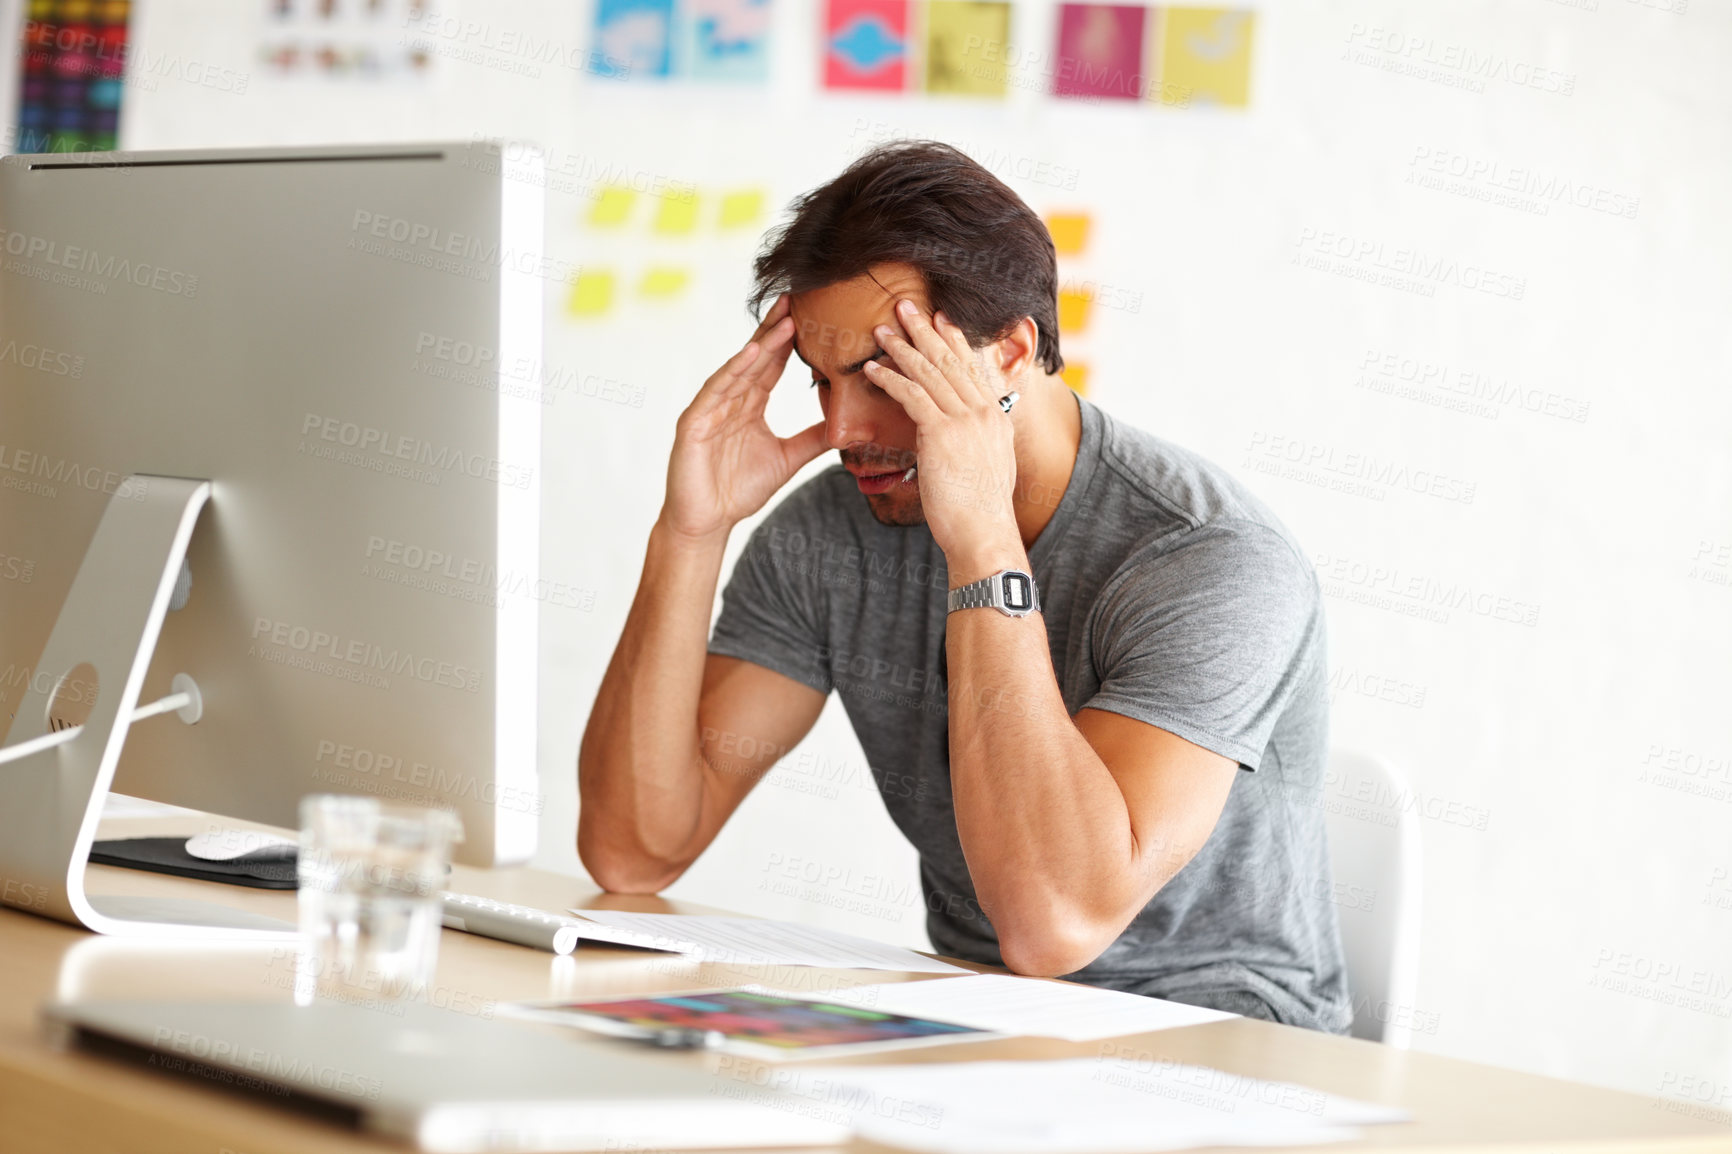 Buy stock photo An overwhelmed man sitting at an office desk with his head rested against hands